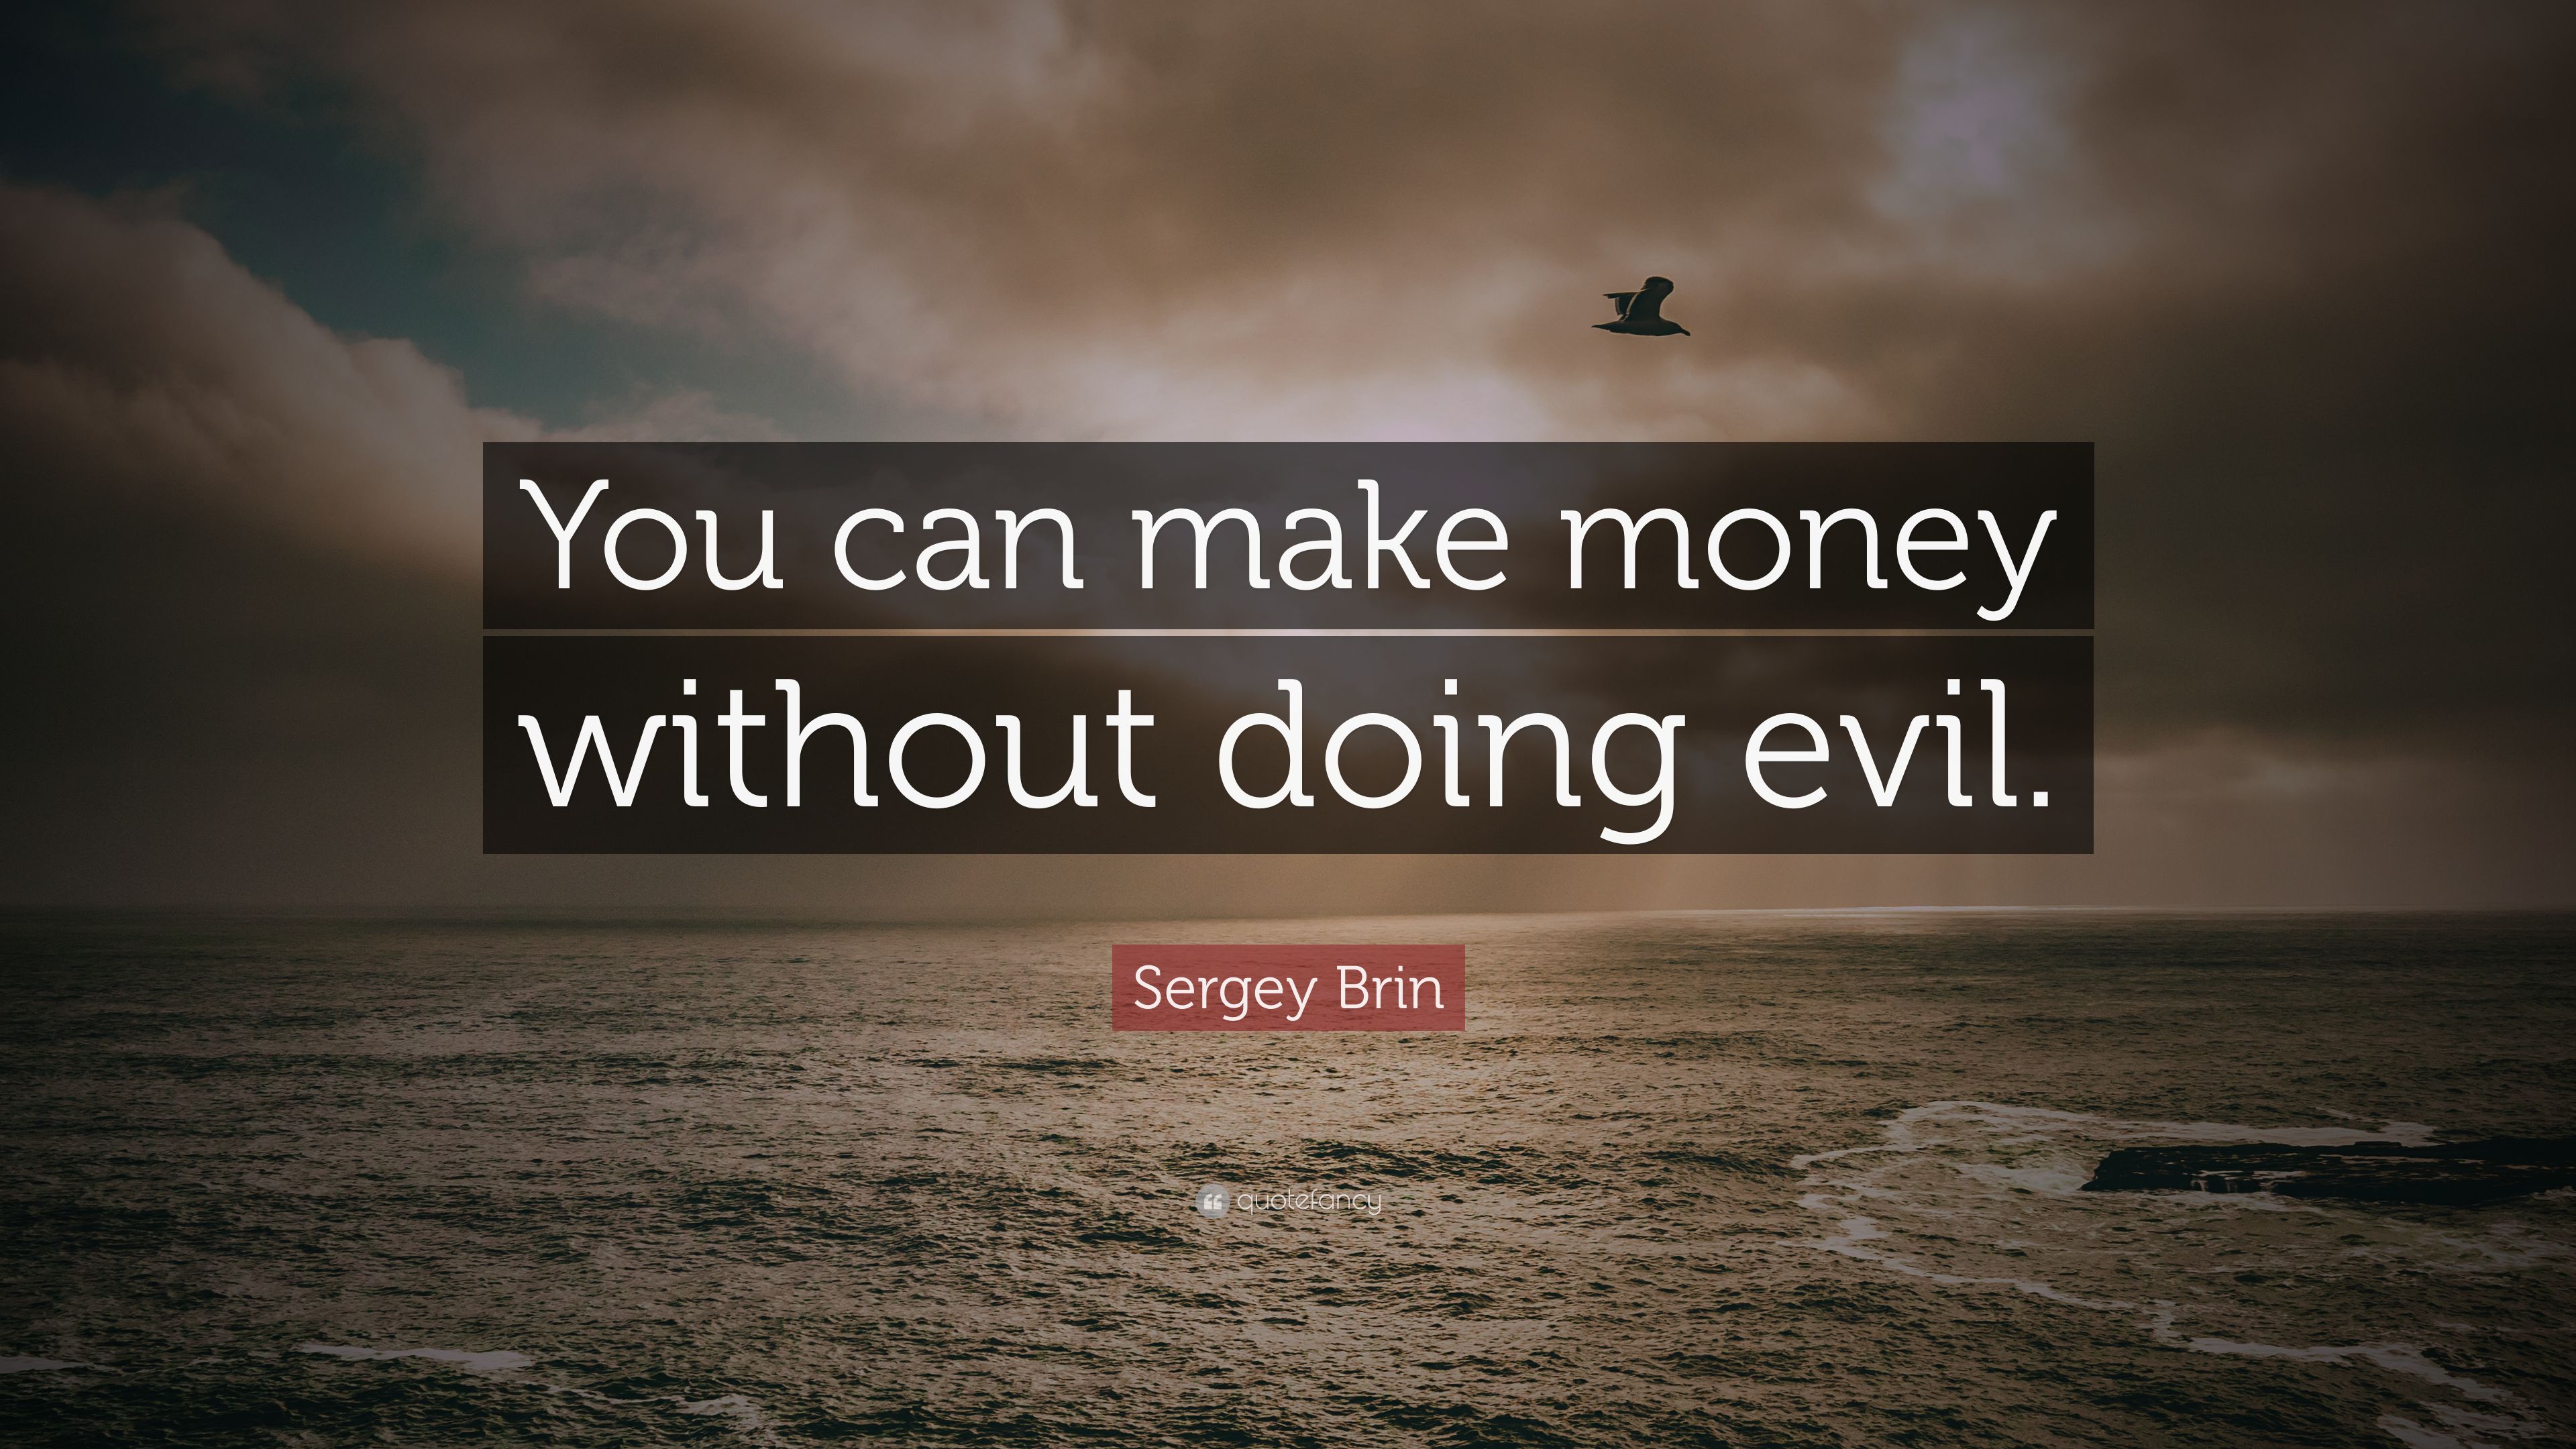 Sergey Brin Quote: “You can make money without doing evil.” 9